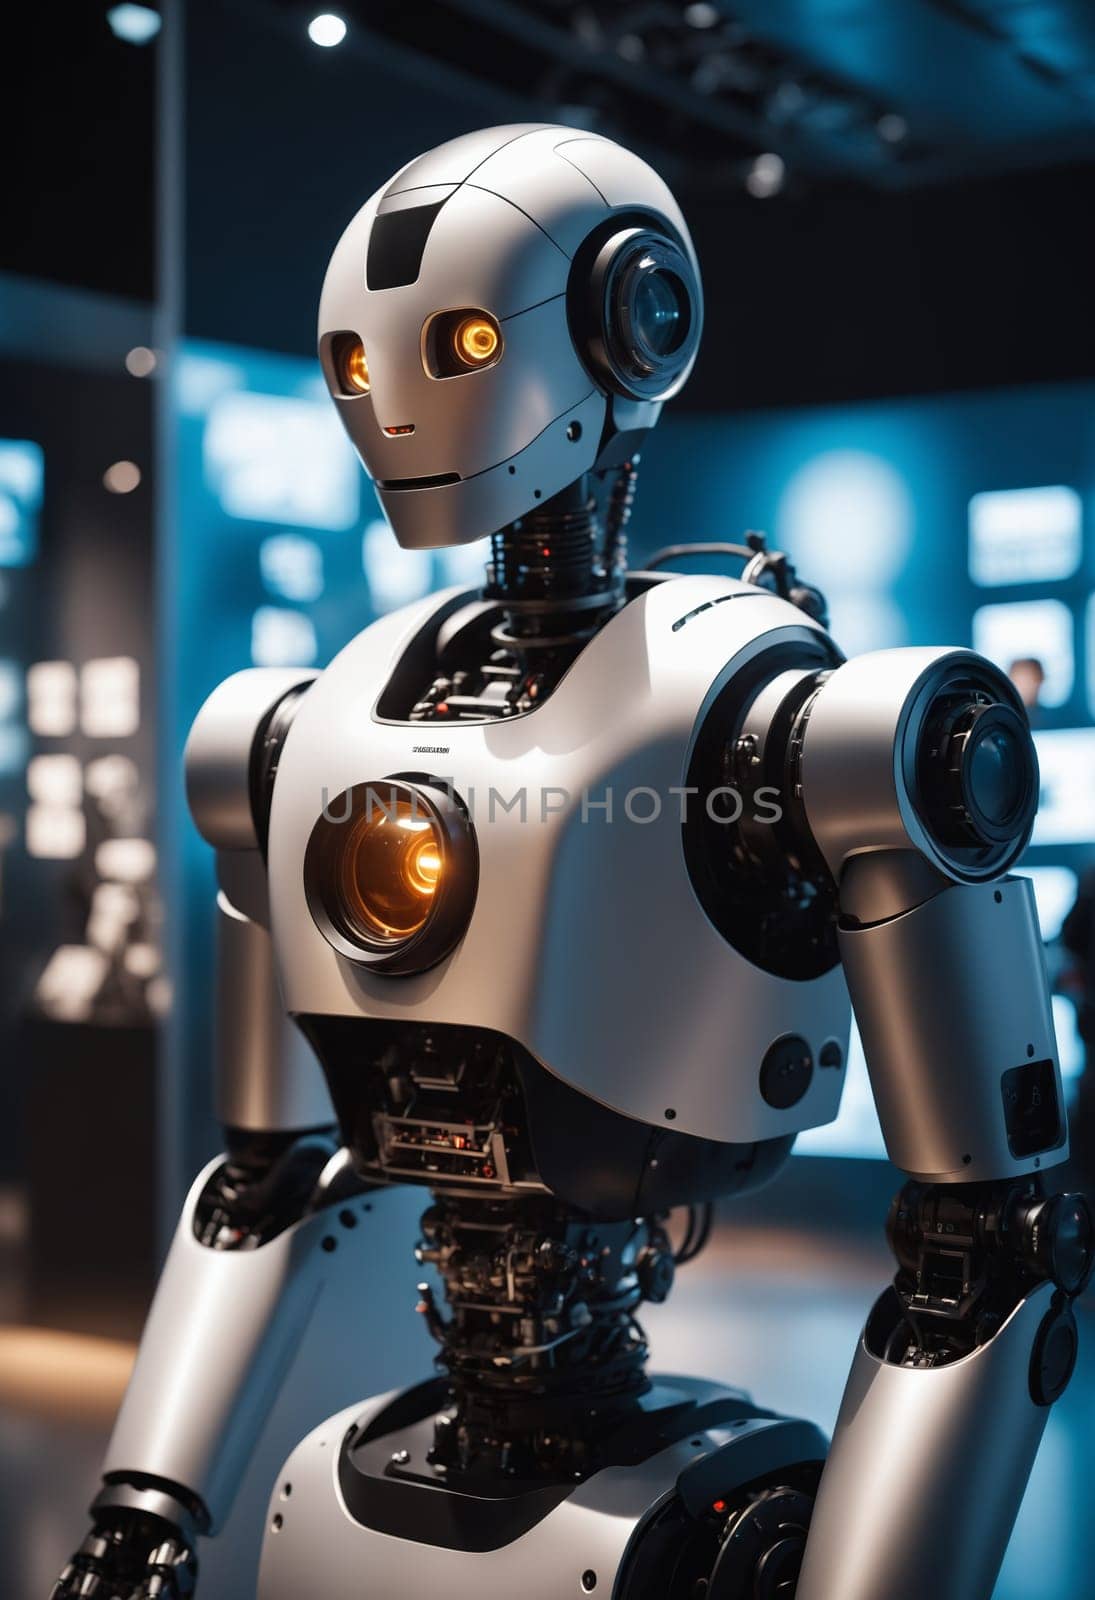 A robot, made of composite material and metal, stands in a museum wearing personal protective equipment. It is looking at a screen displaying an electric blue fictional character collectible event